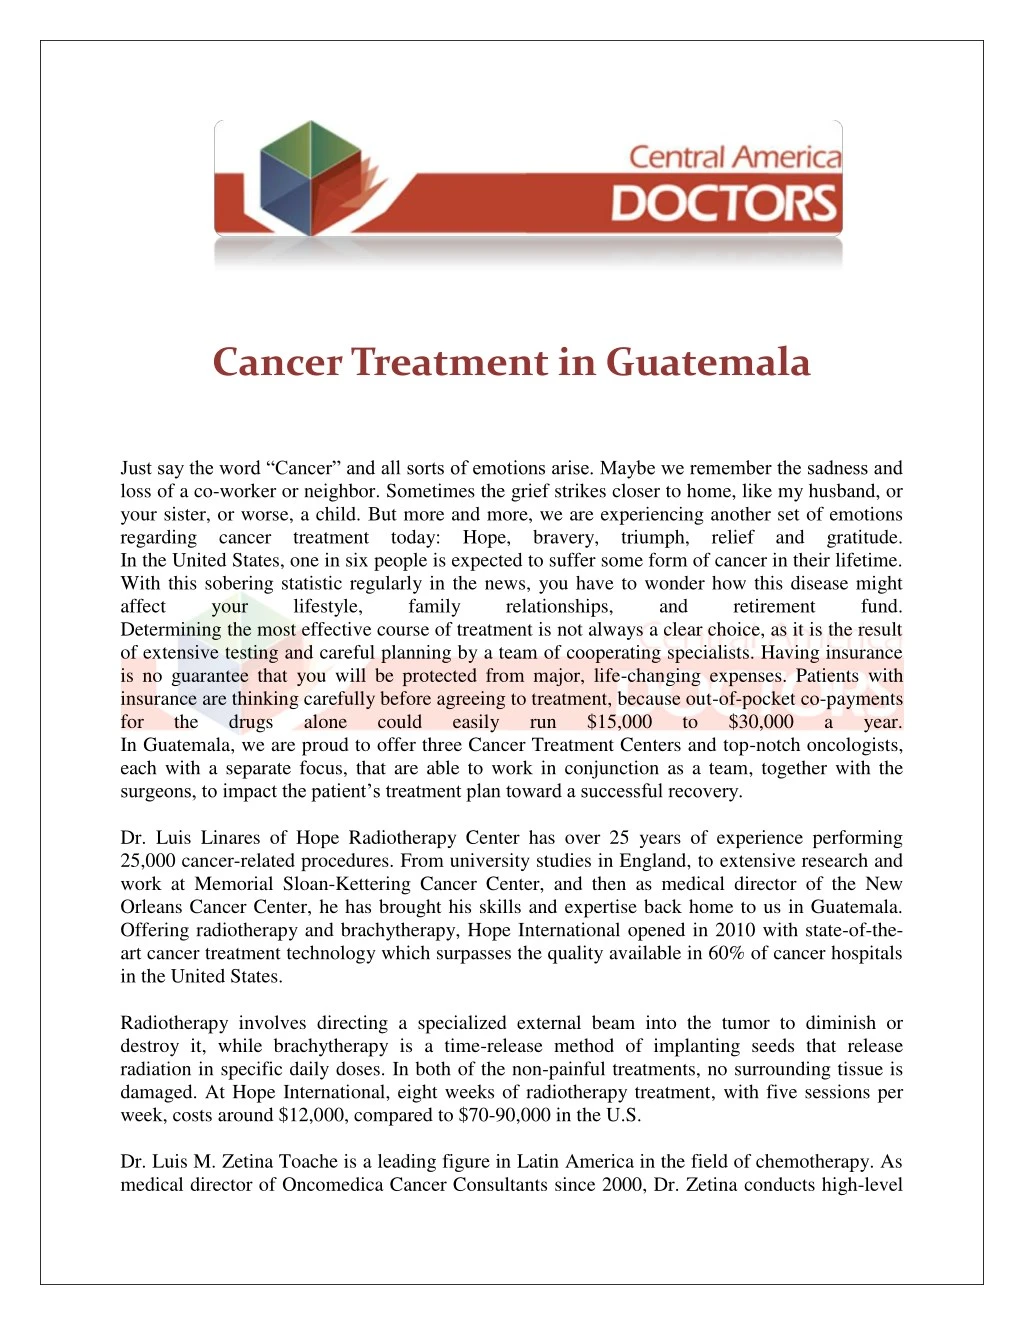 cancer treatment in guatemala